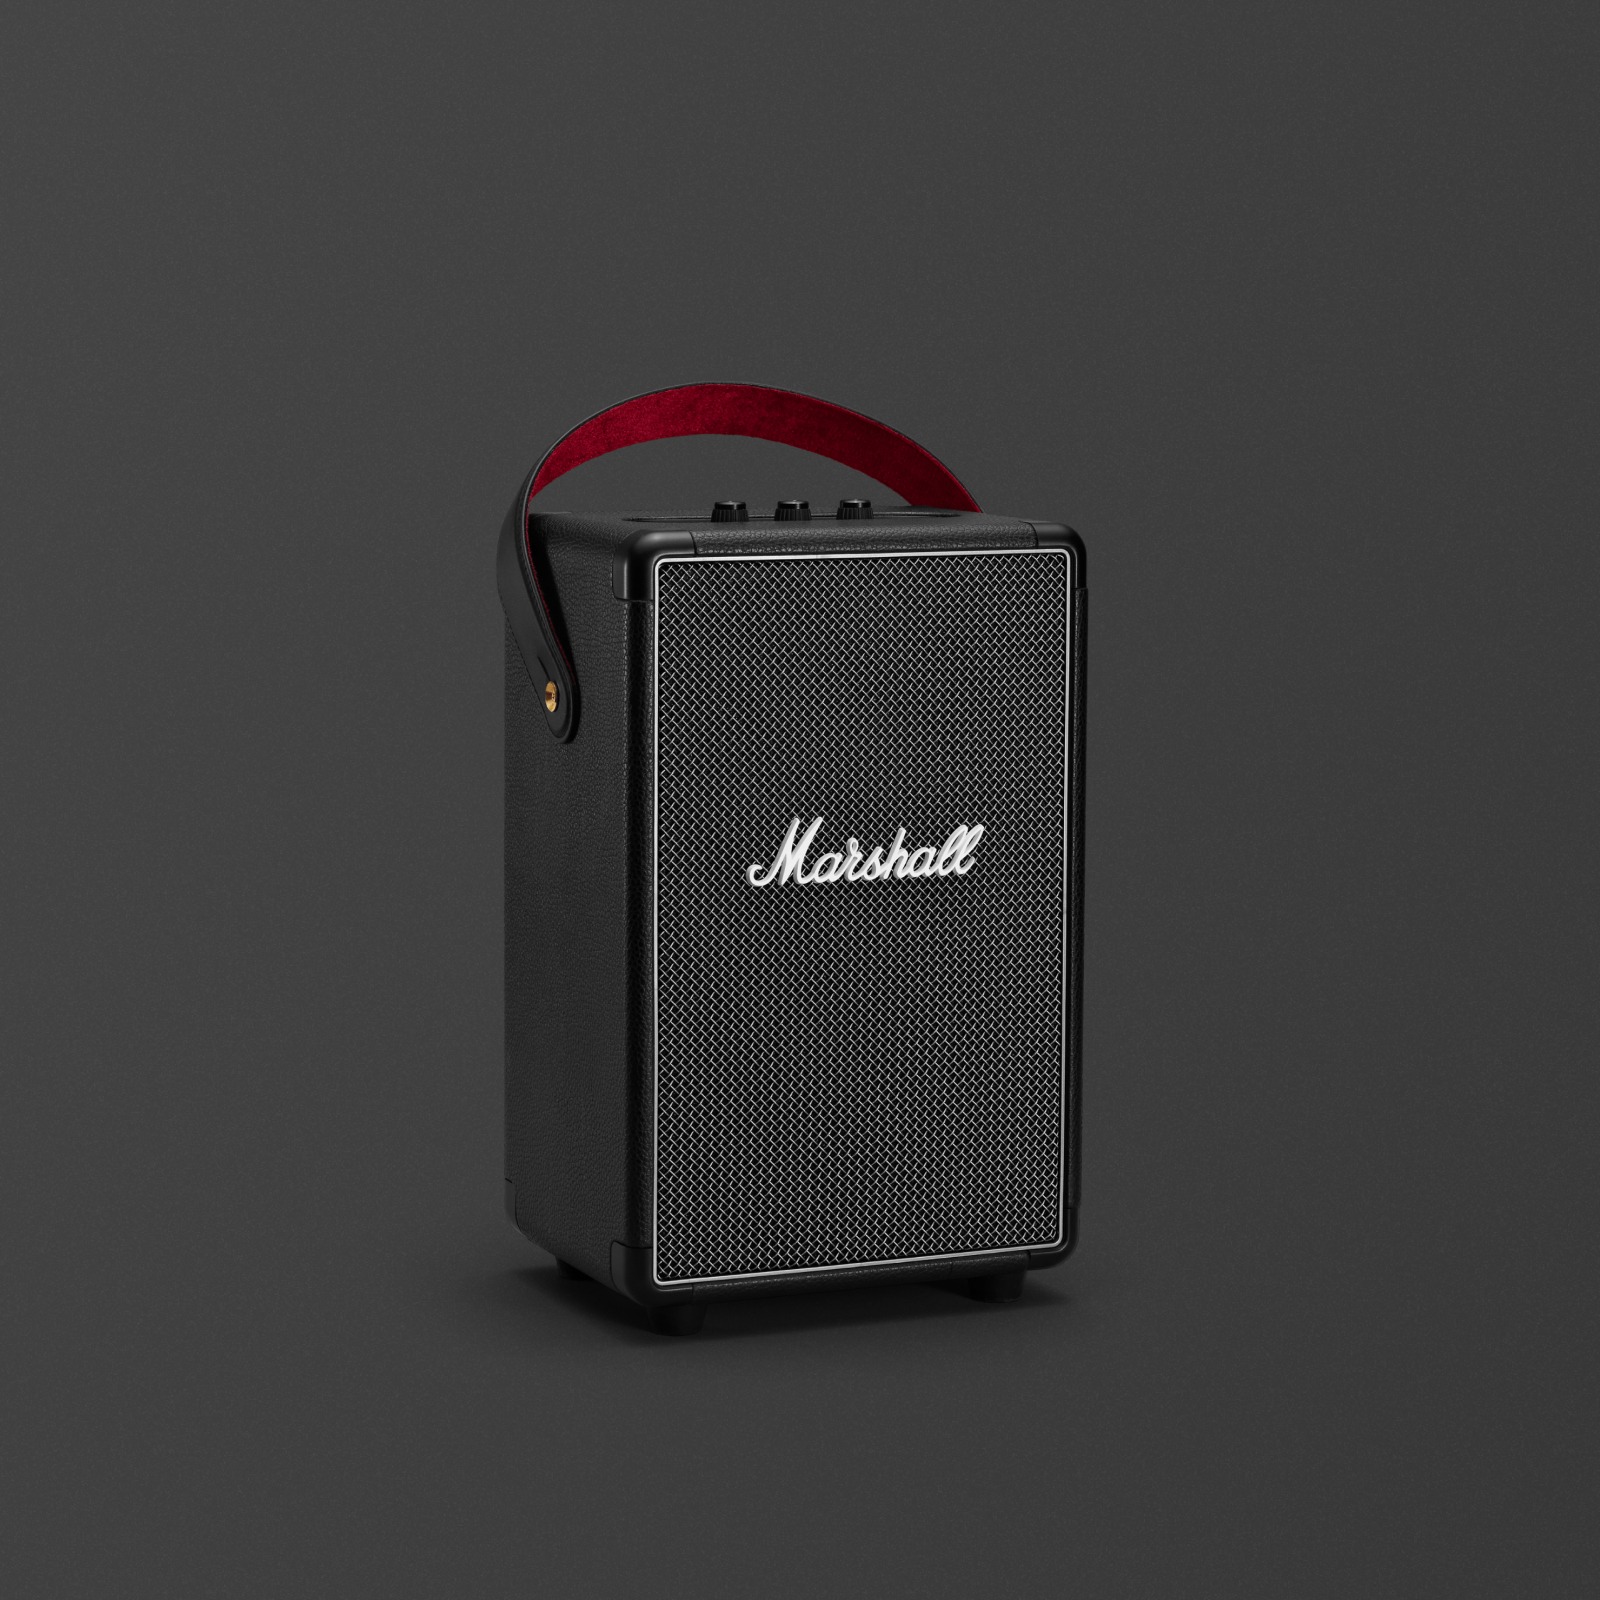 The Marshall TUFTON BLACK is a sleek and compact black speaker that delivers powerful and crisp sound.